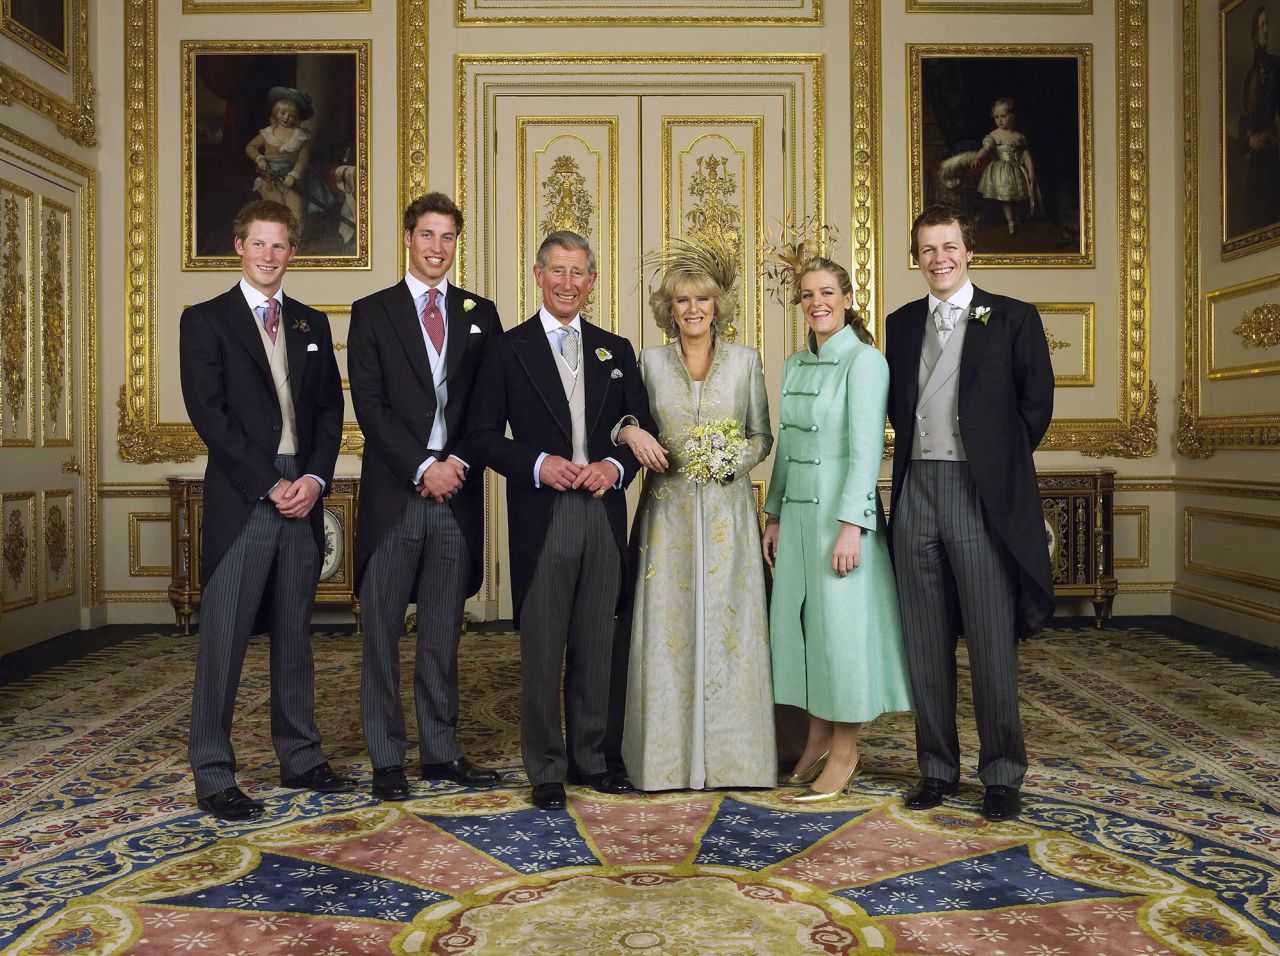 On the day of their wedding in April 2005, Charles and Camilla are joined by their children. On the left are Charles' sons Prince Harry and Prince William. On the right are Camilla's children Laura and Tom Parker Bowles.